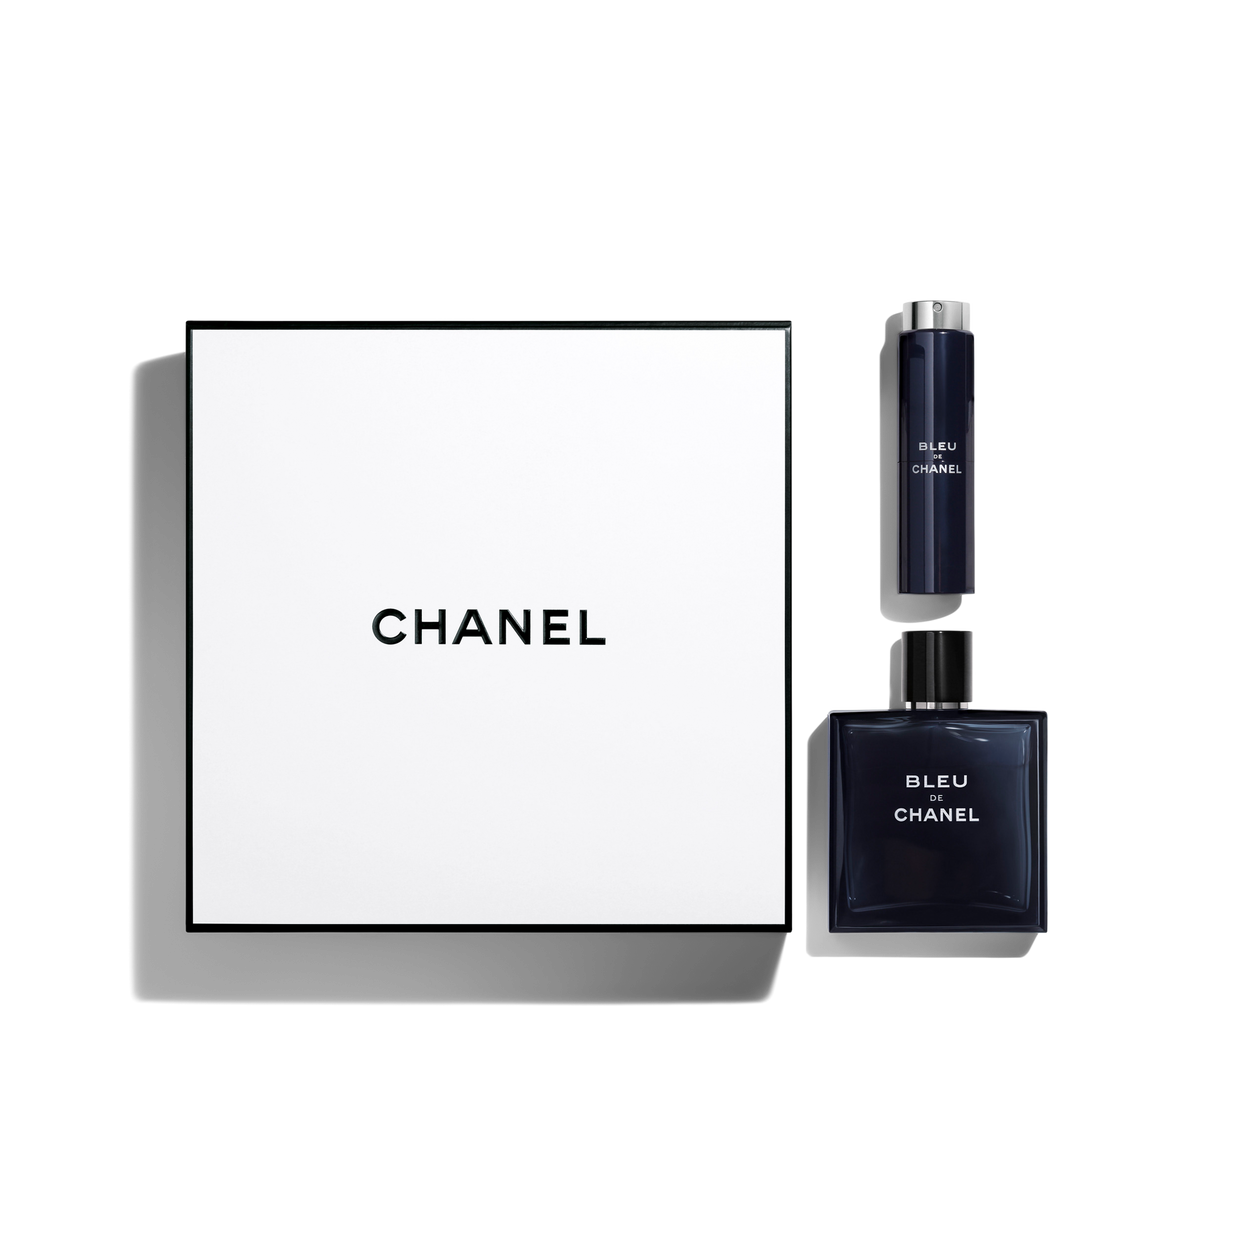 Chanel releases new Chance 'twist & spray' perfumes - Her World Singapore